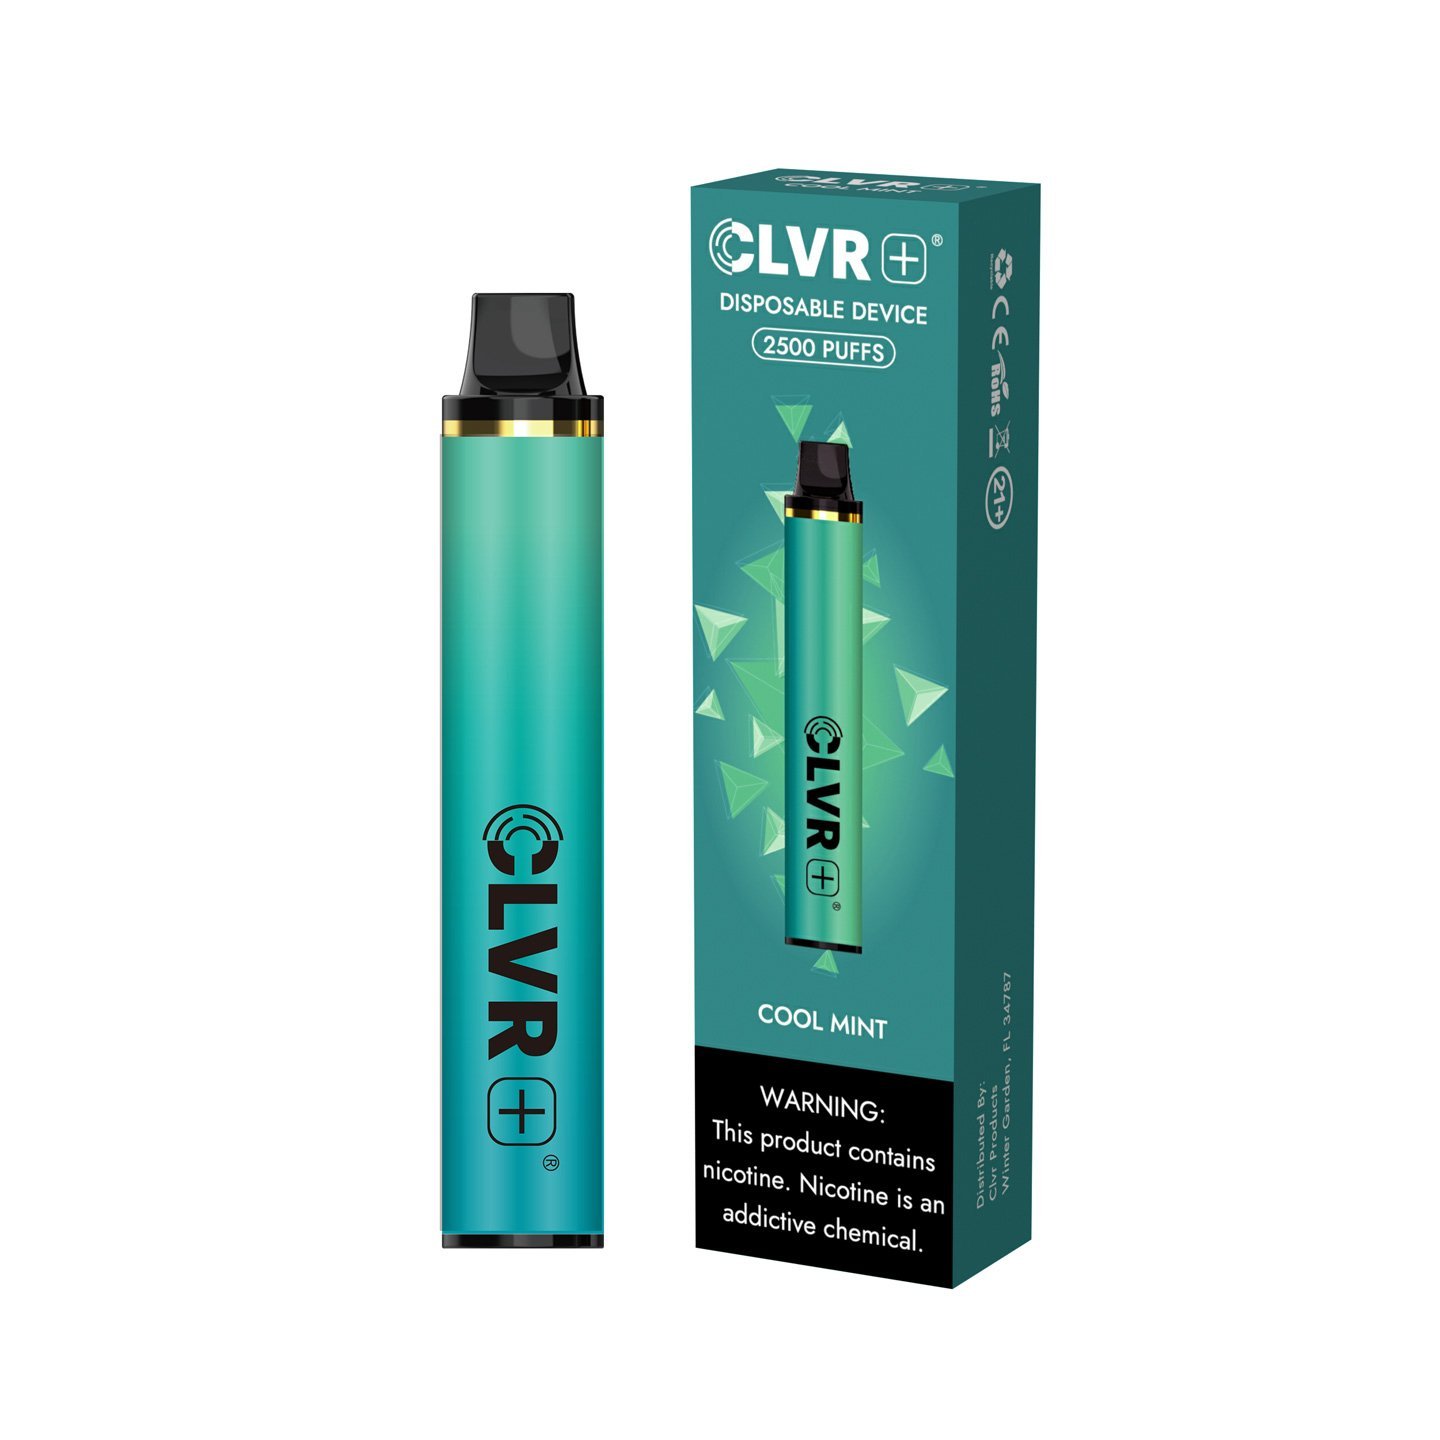 CLVRPlus Disposable Device (Cool Mint- 2500 Puffs)